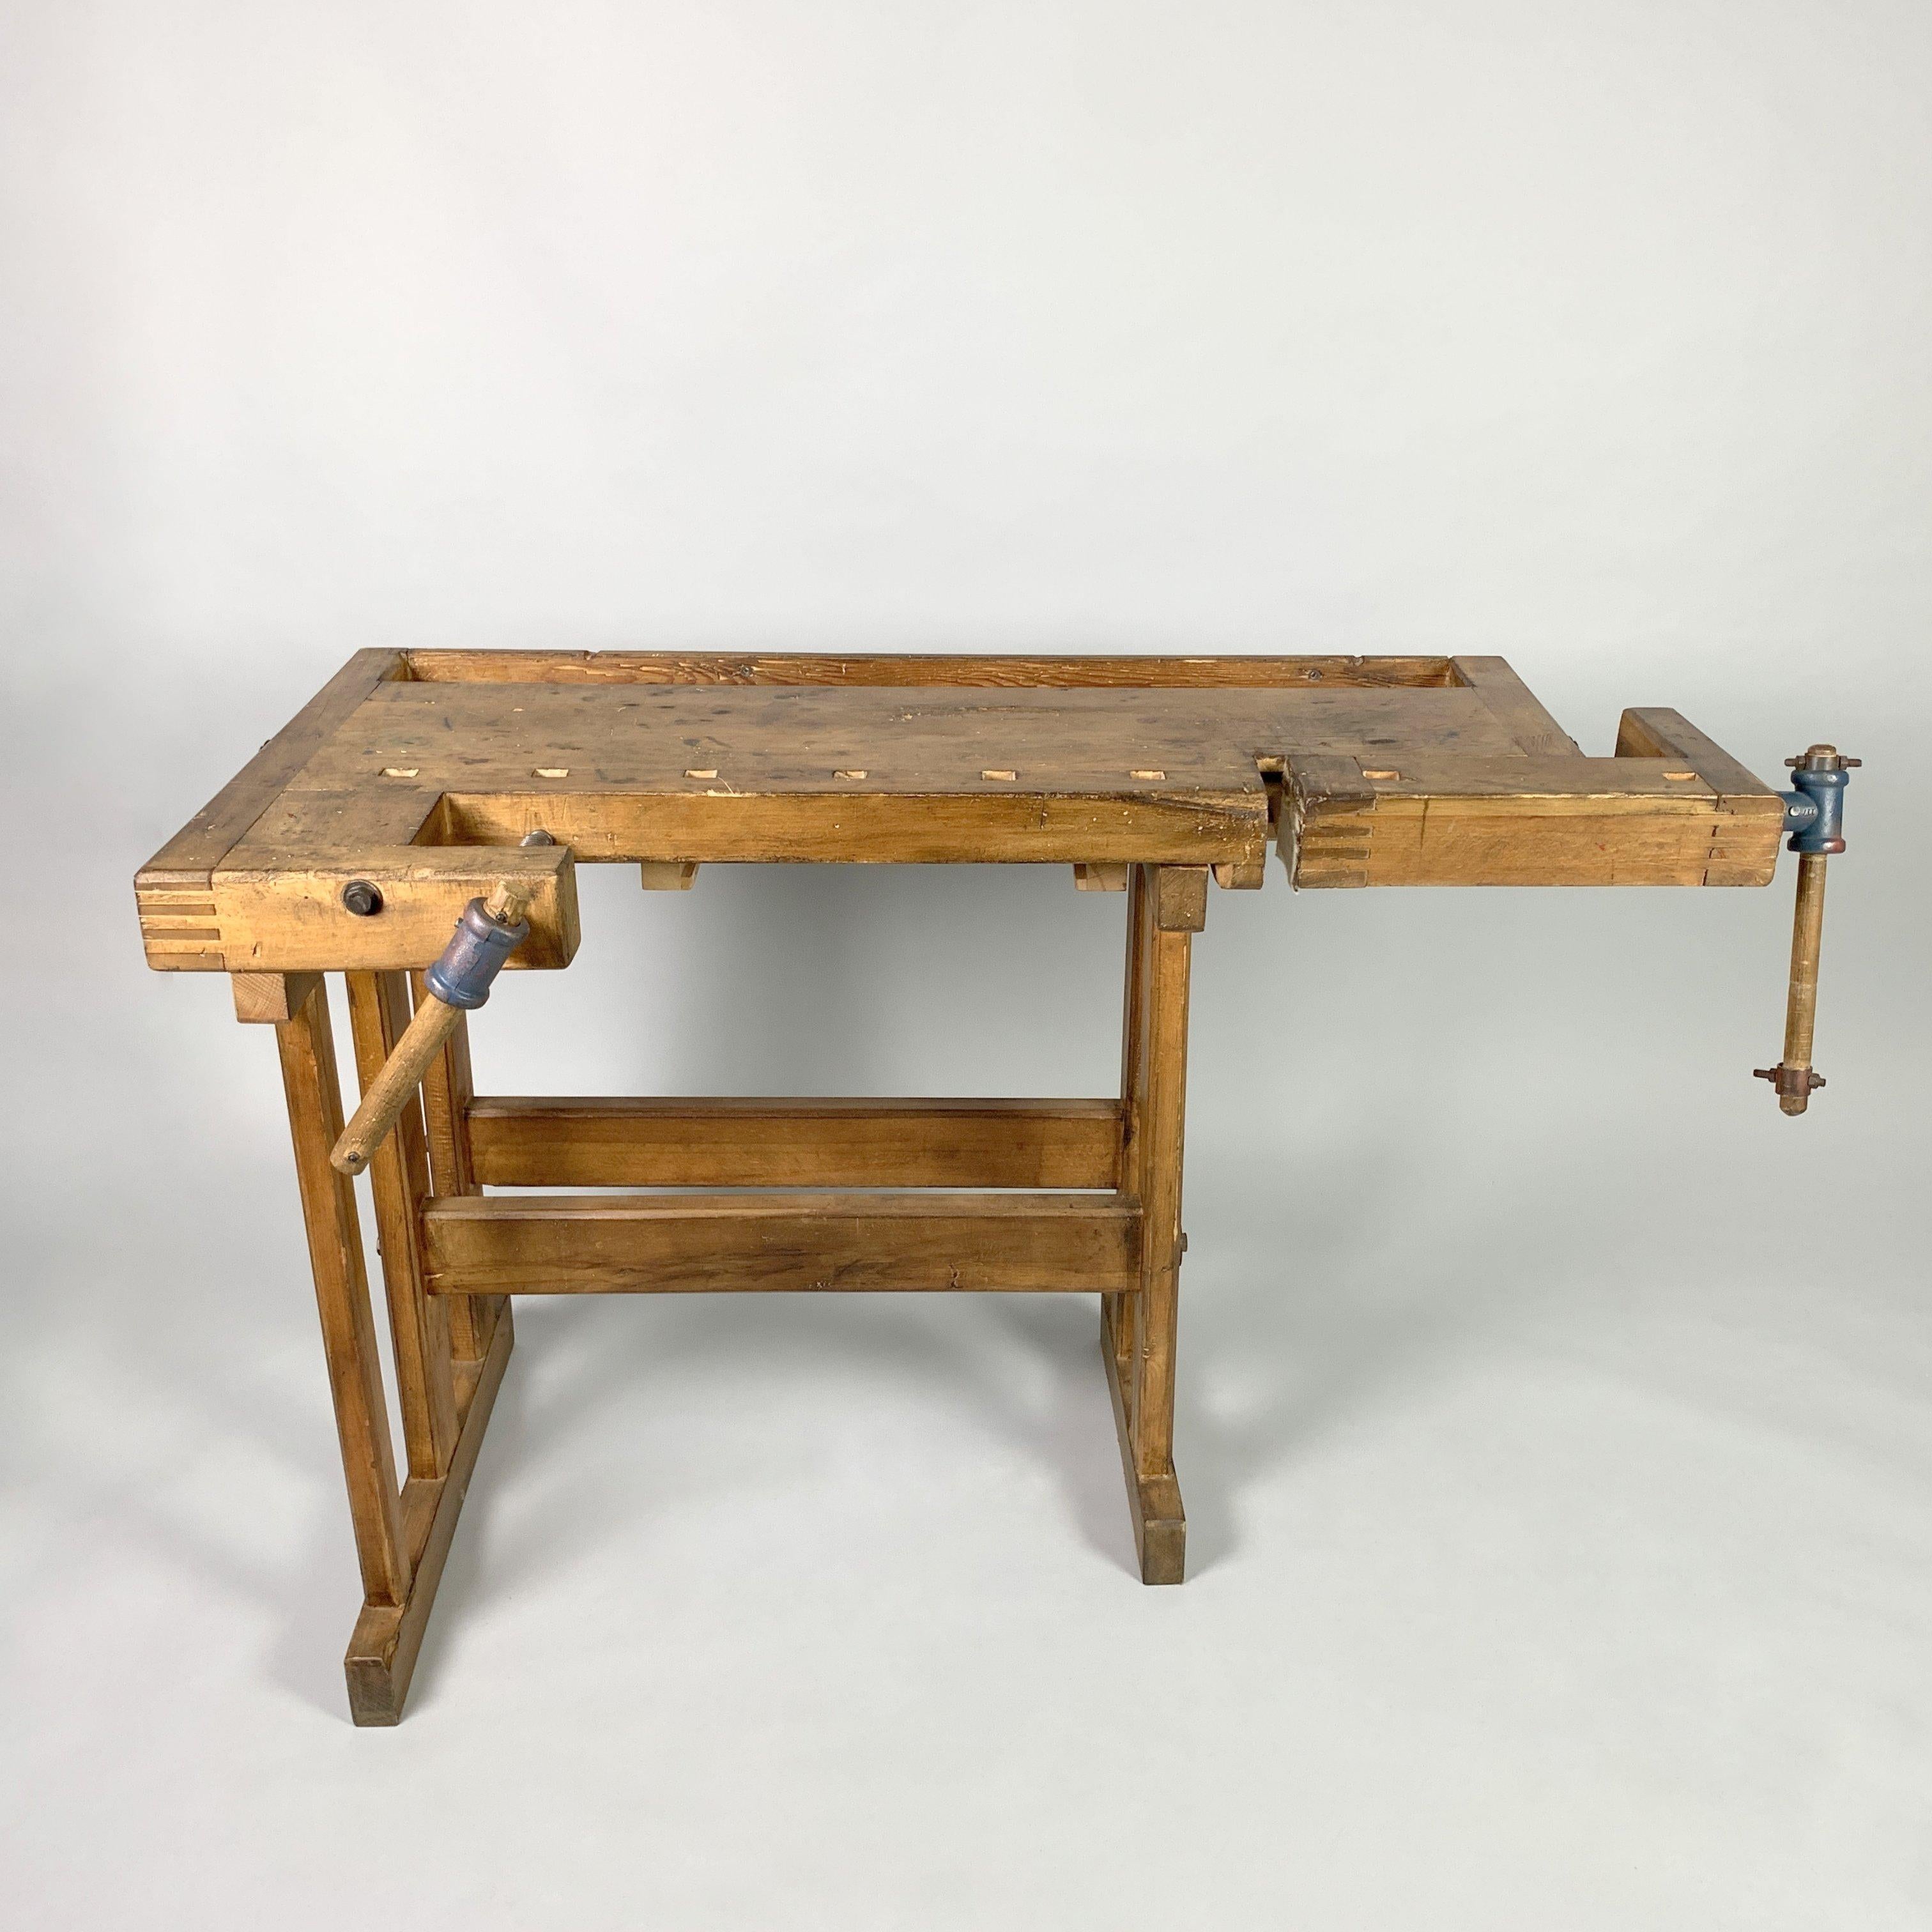 Carpenters workbench, two built-in wooden vices screws. Produced in former Czechoslovakia in 1950s by Hikor Pisek as labelled (see photo). Can be used as a side table, sideboard, serving table or console. Cleaned and oiled.